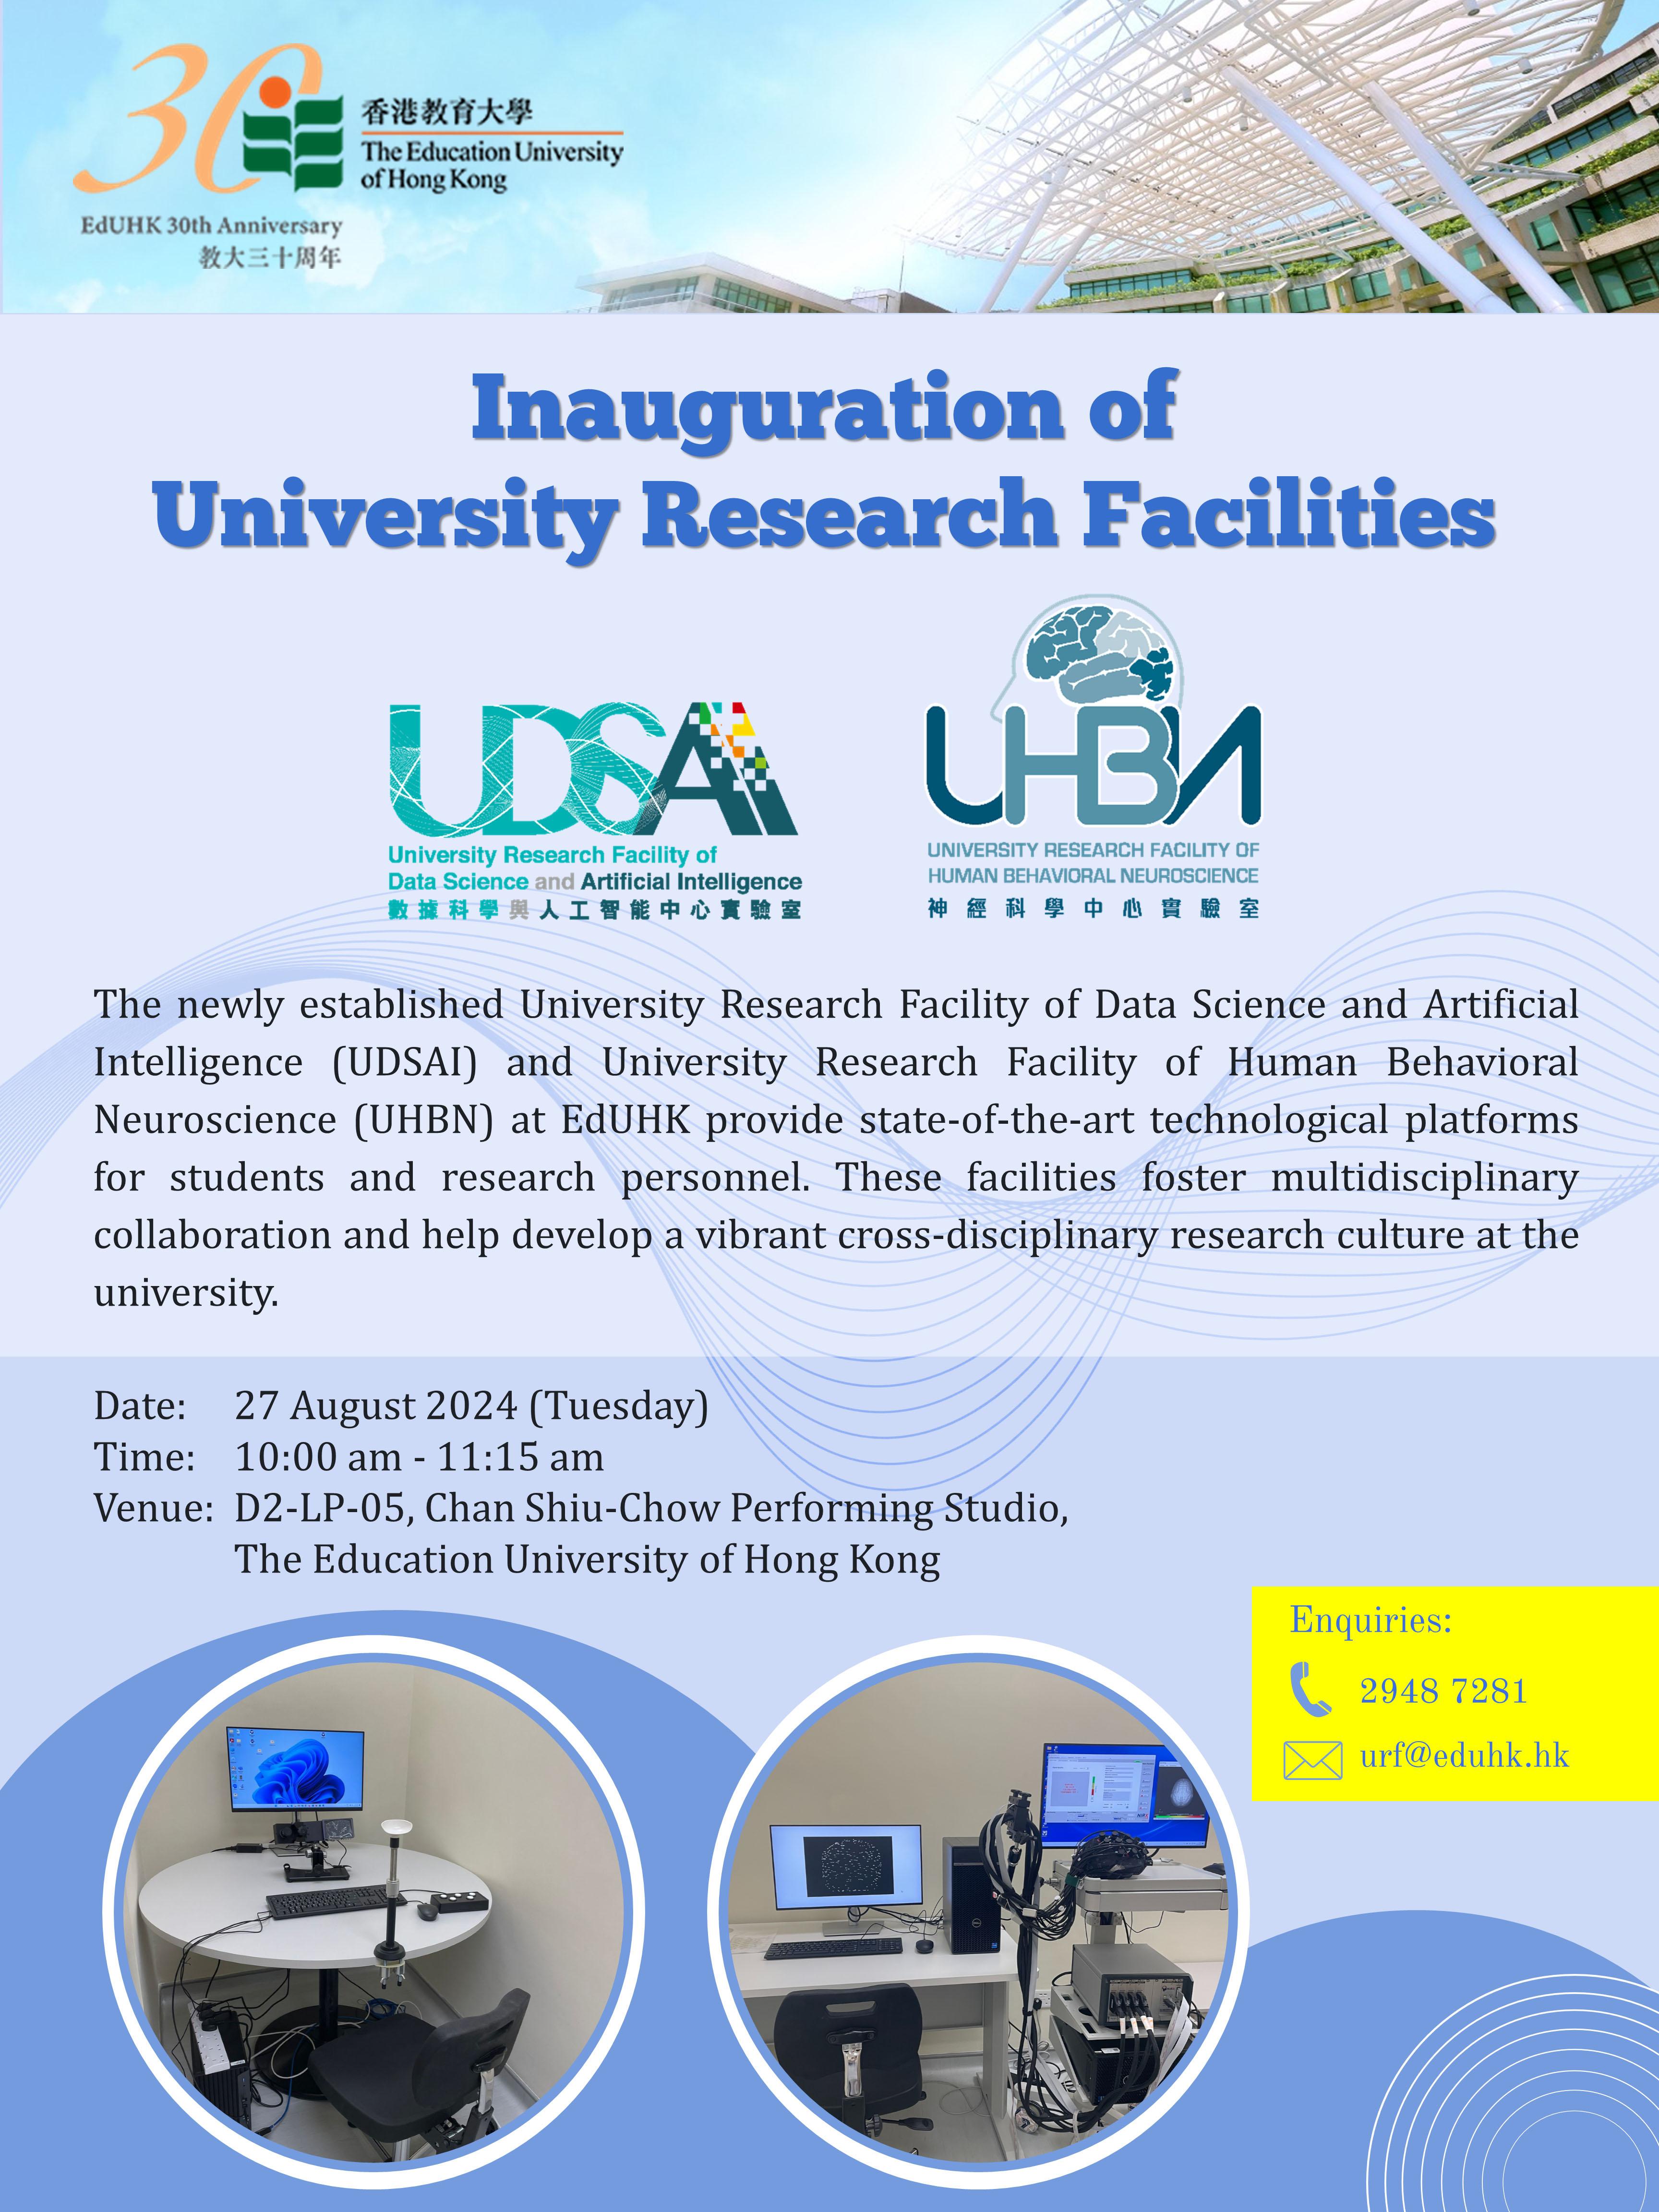 Inauguration of the University Research Facilities